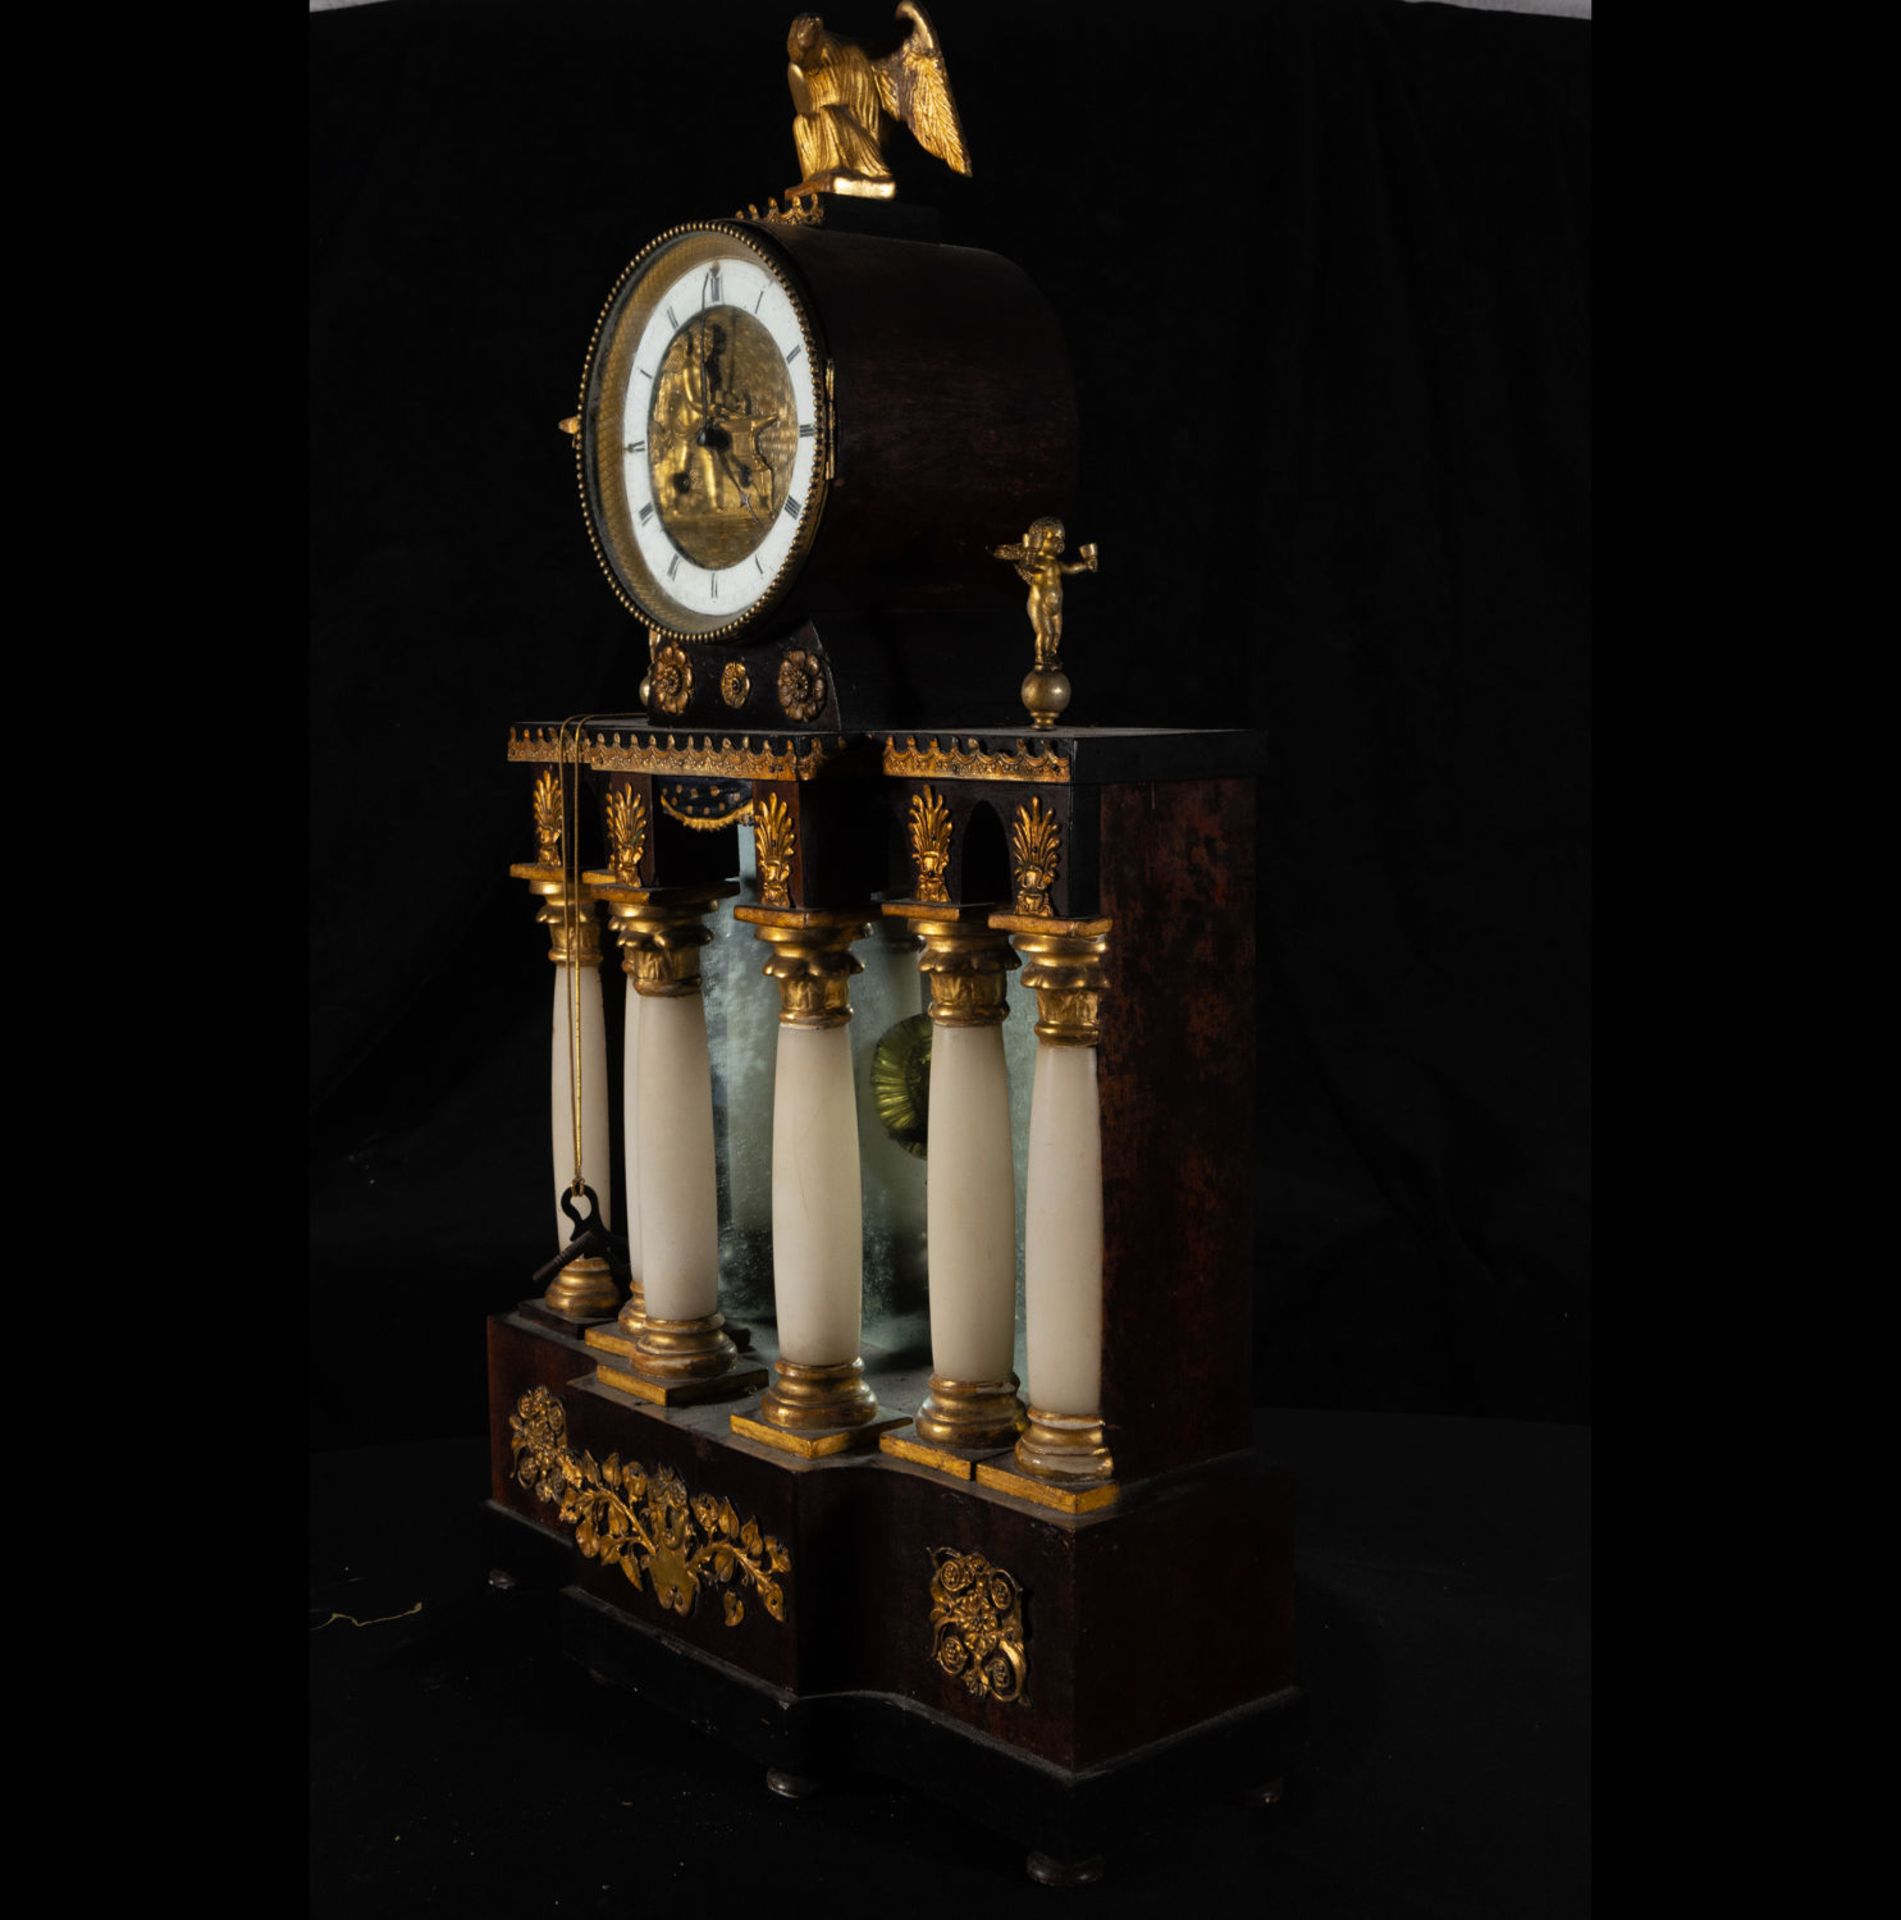 Large and Exquisite Bilderrahmen Table Clock with Automata from the late 19th century, Austria - Image 15 of 15